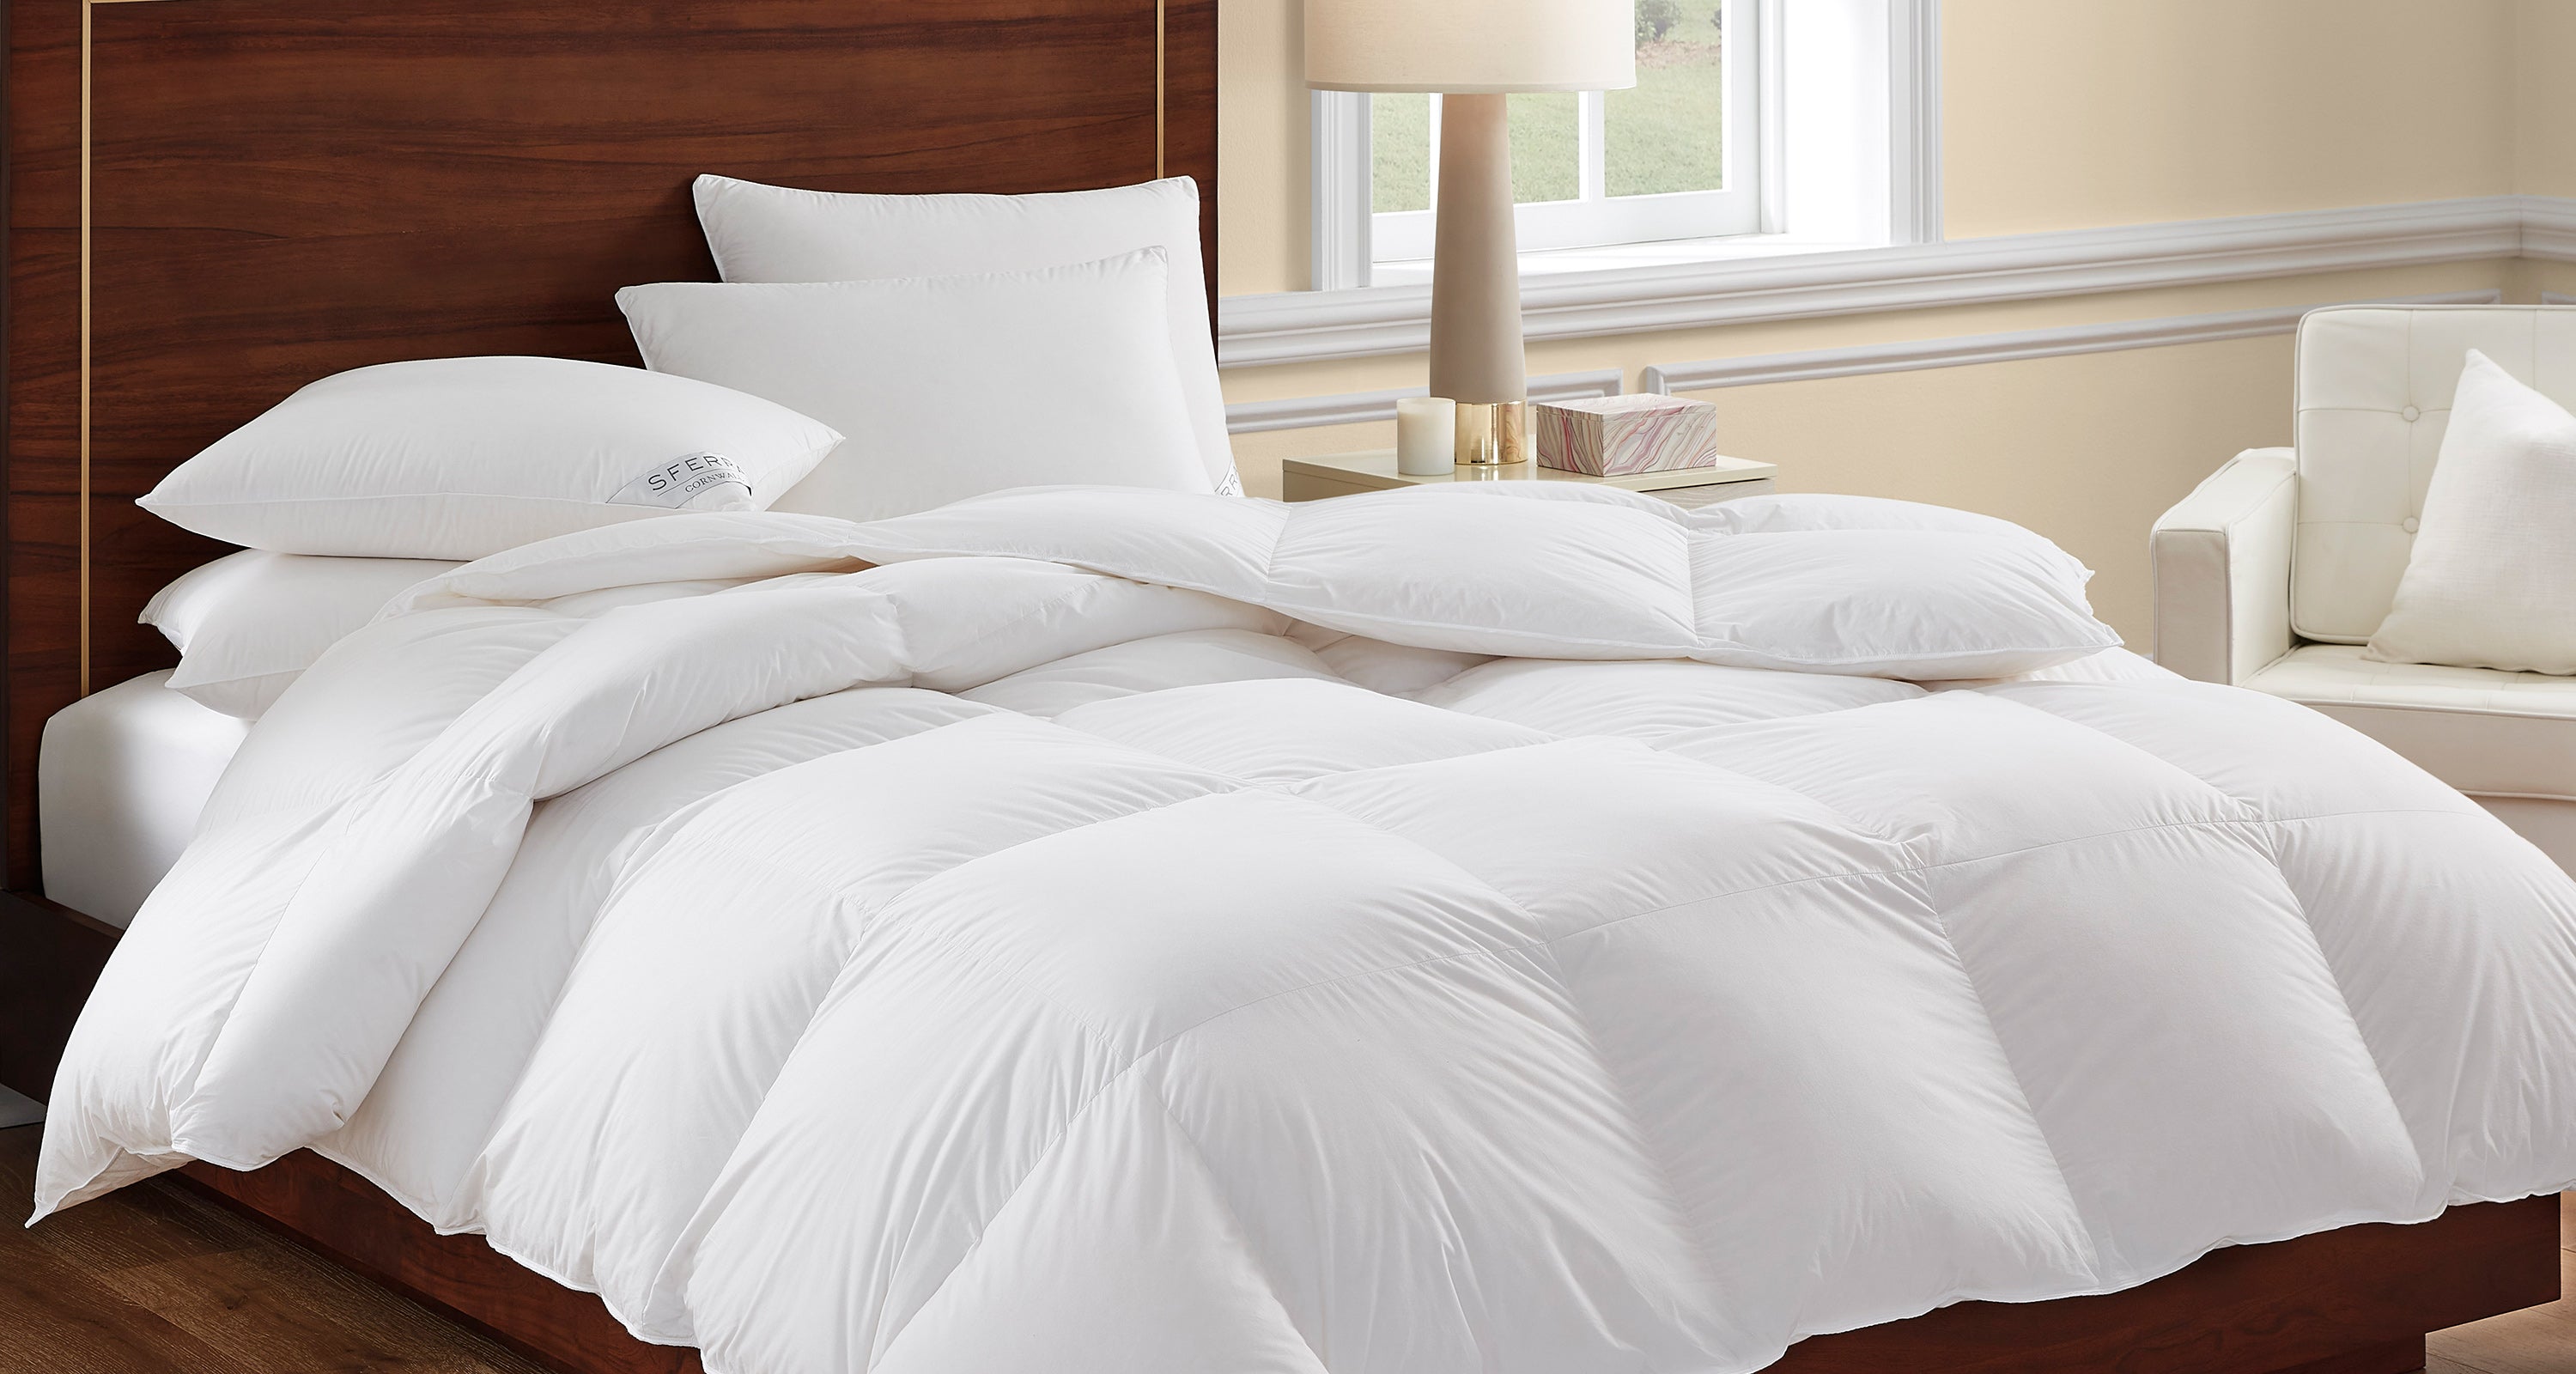 A SFERRA white goose down duvet draped over a bed.